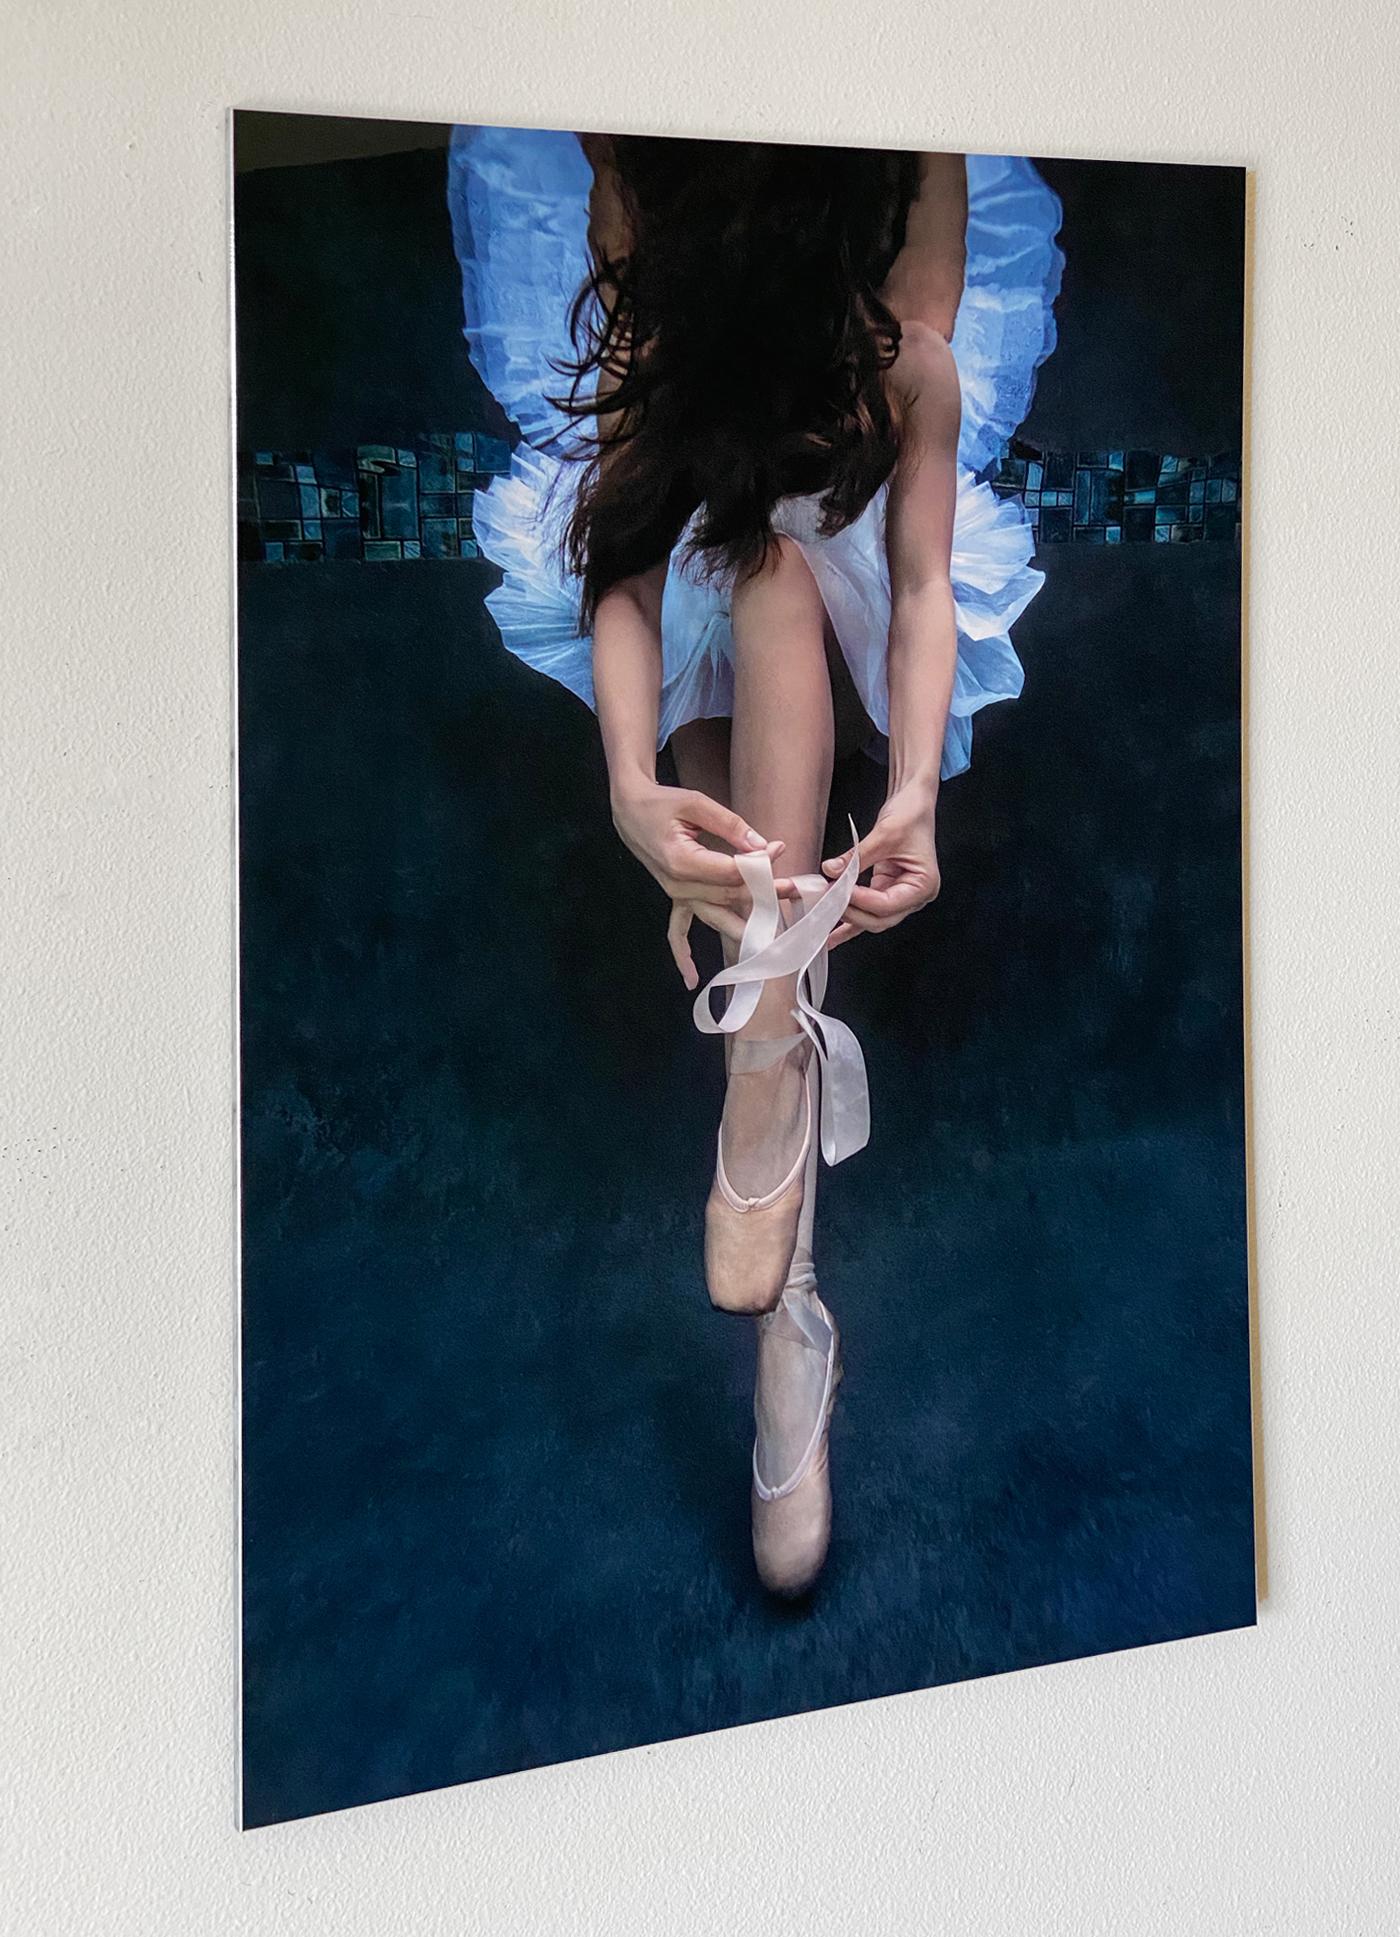 Pointe - underwater photograph - print on aluminum - Contemporary Photograph by Alex Sher